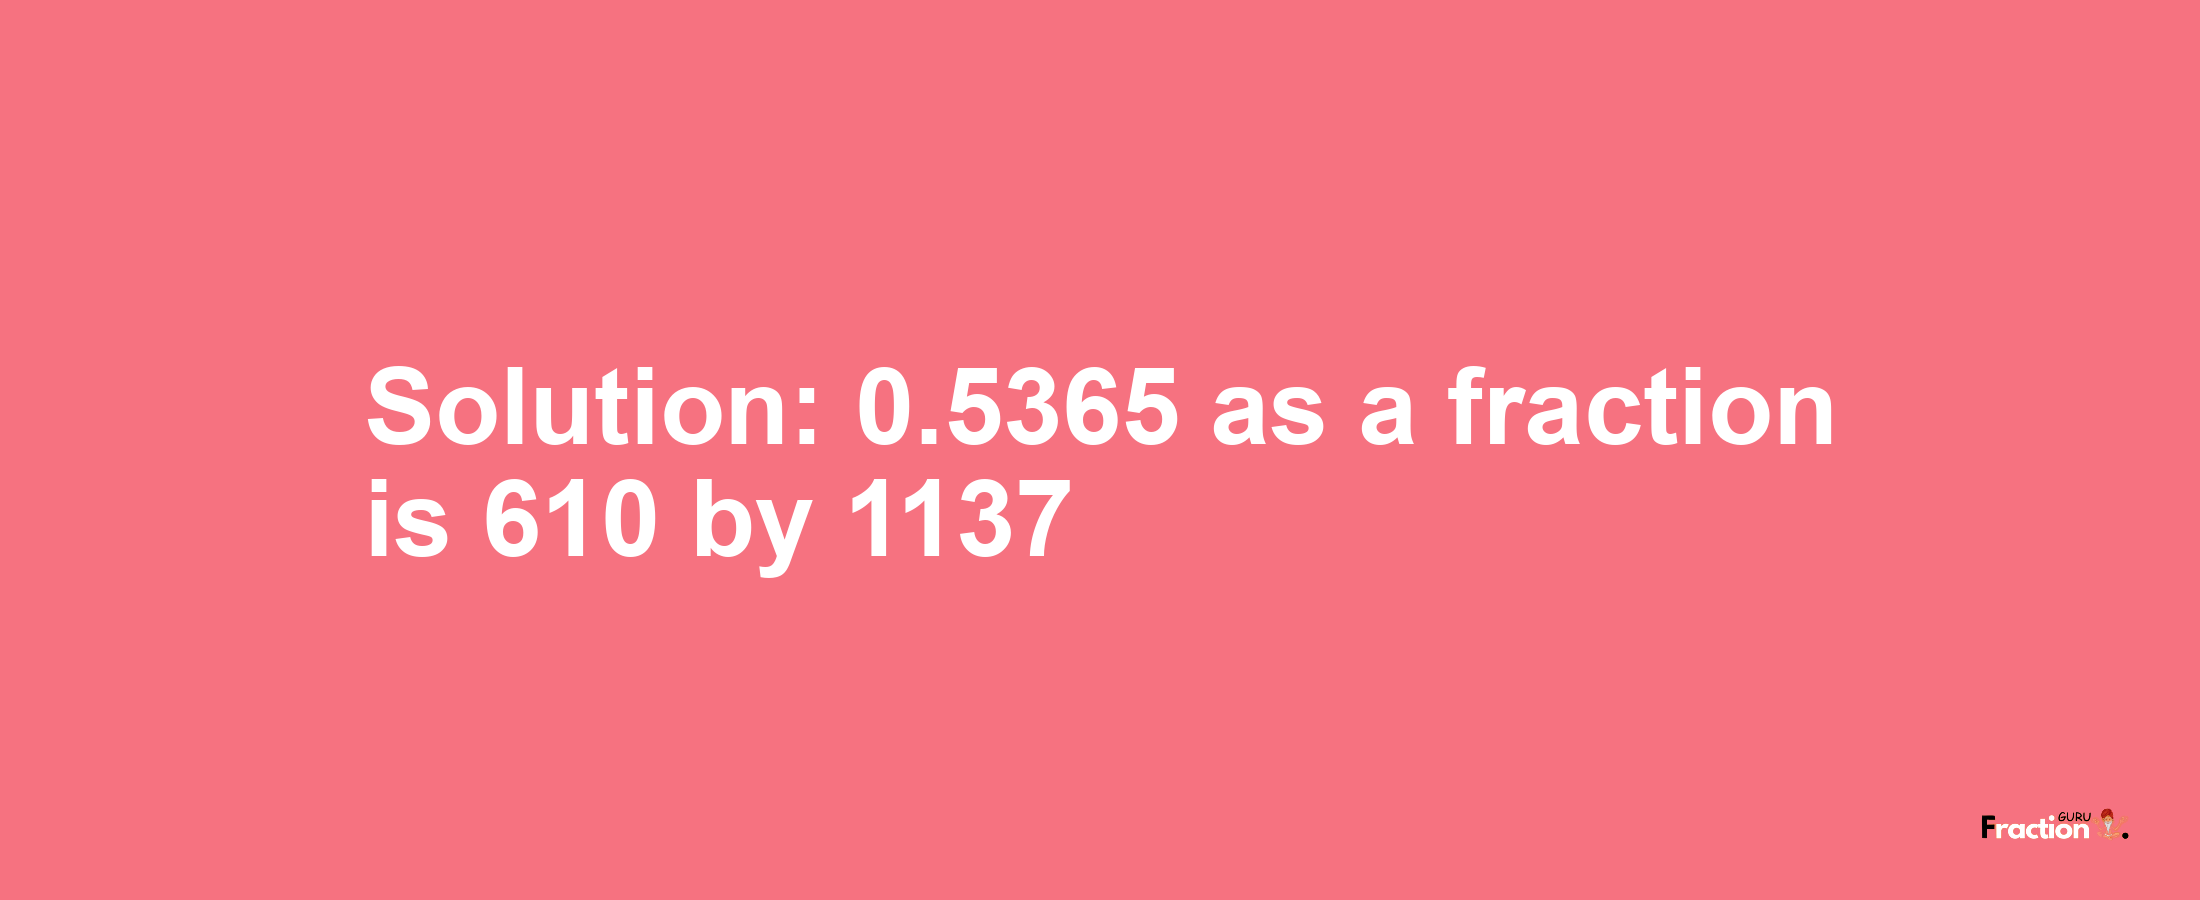 Solution:0.5365 as a fraction is 610/1137